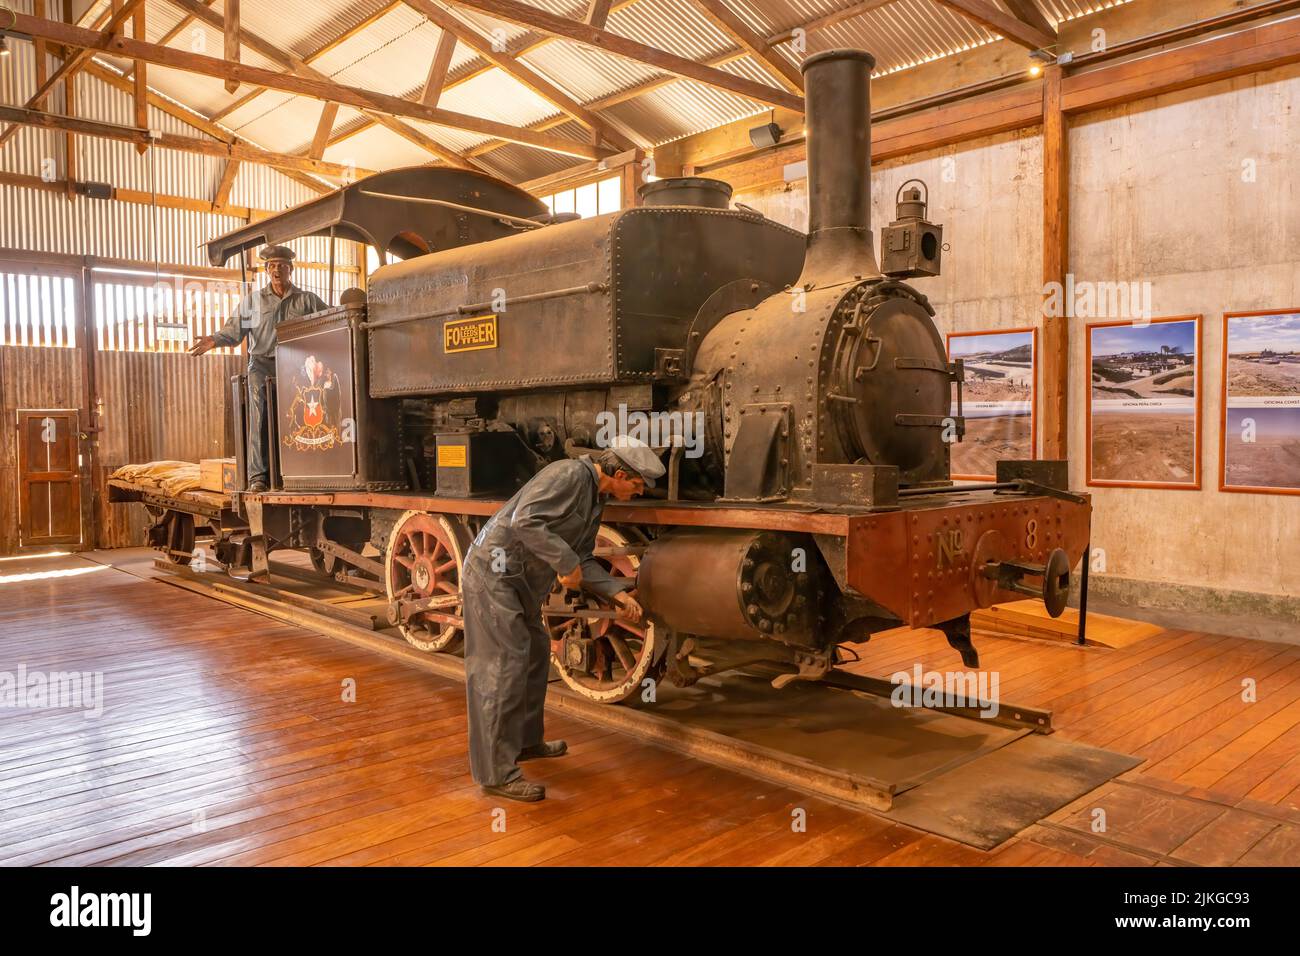 A steam engine with mannequins on display in the museum of the saltpeter or nitrate processing plant at Humberstone, Chile. Stock Photo